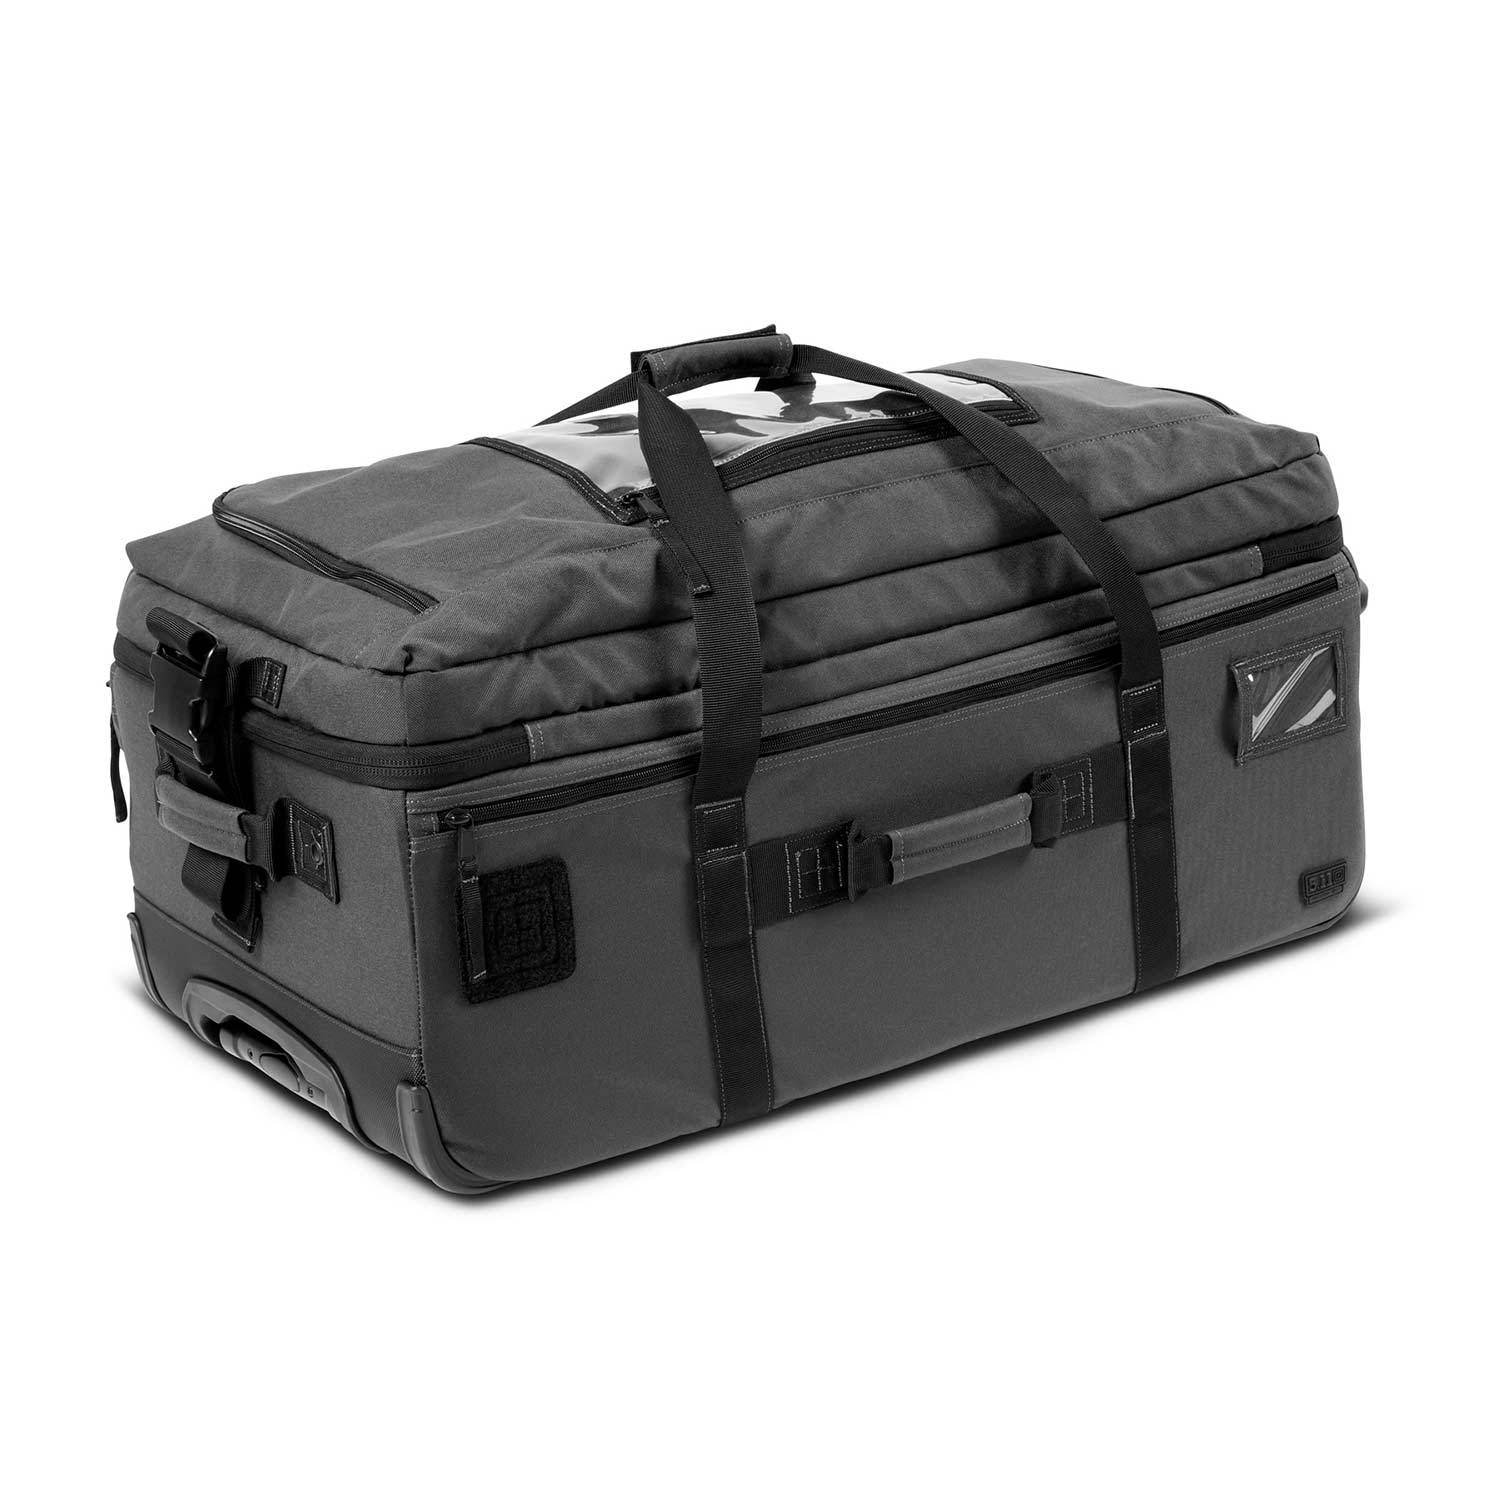 5.11 TACTICAL MISSION READY 3.0 ROLLING DUFFEL BAG